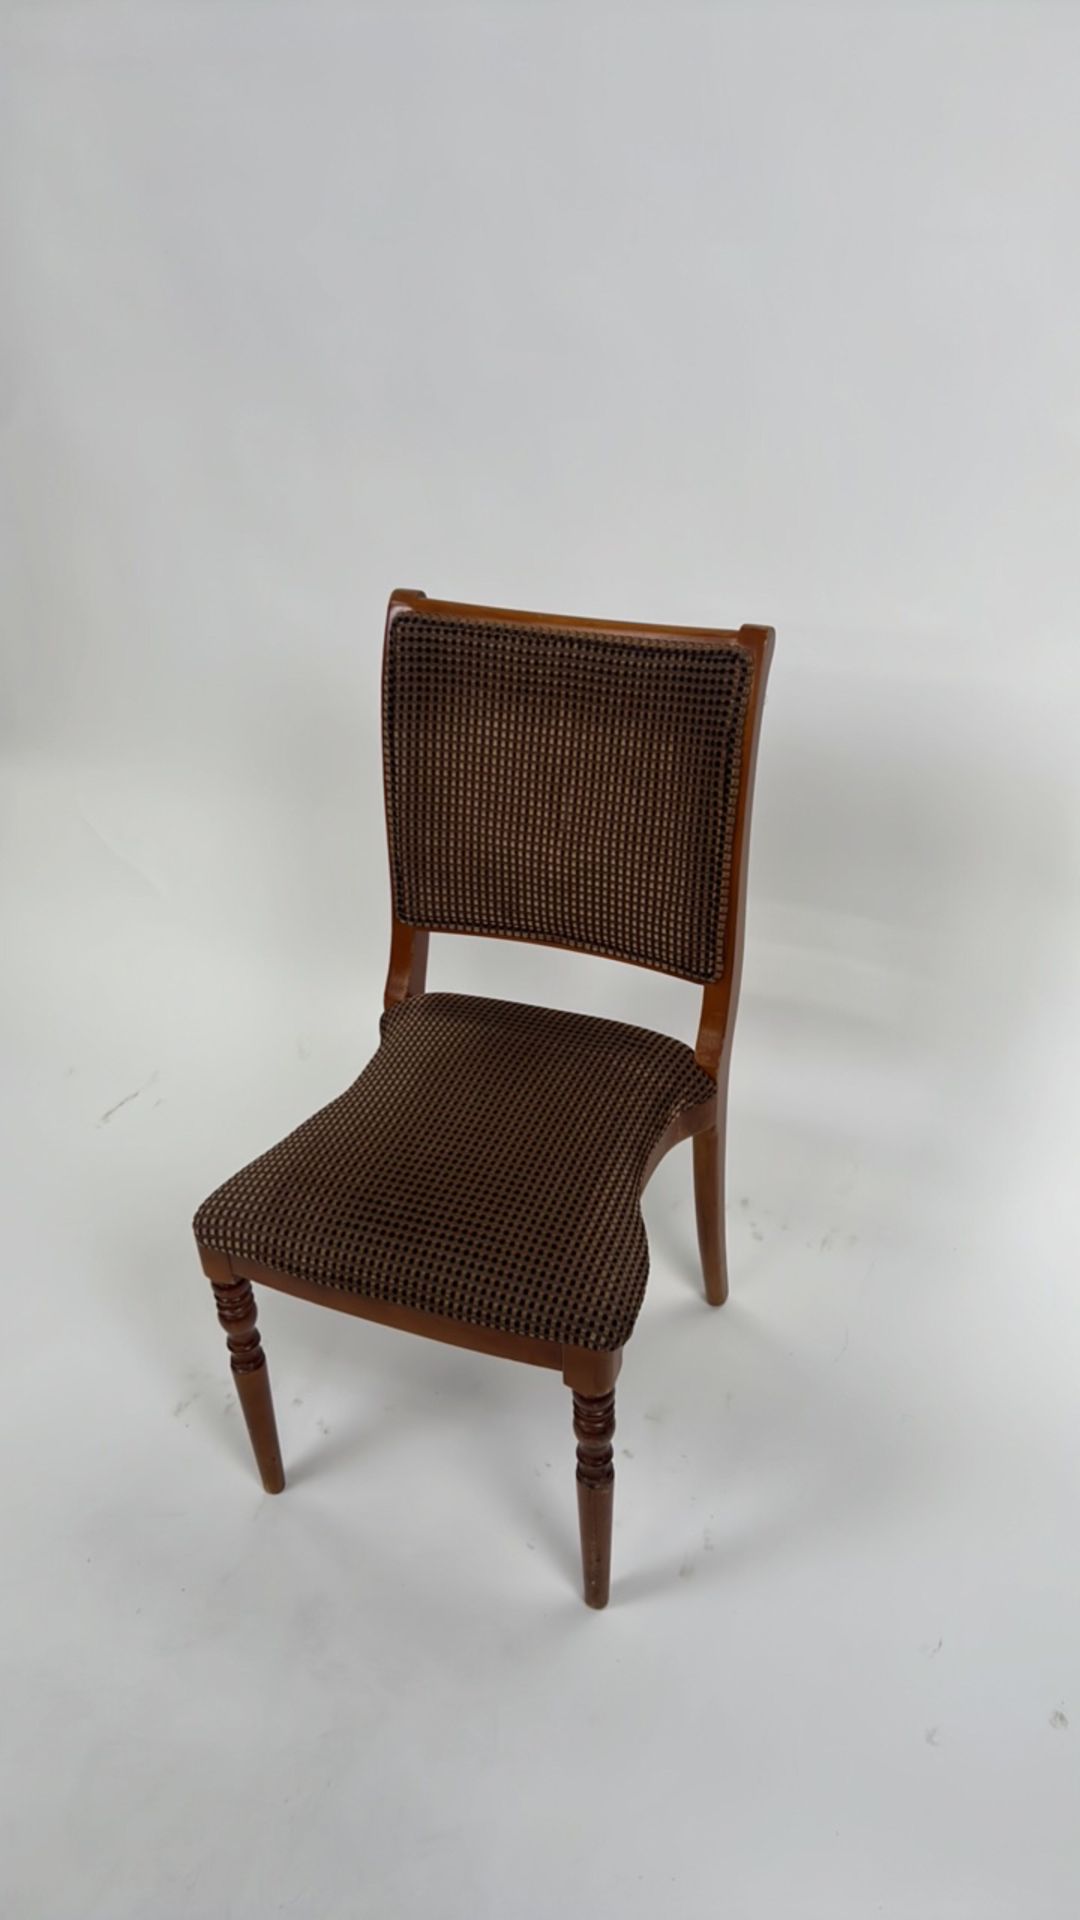 Wooden and Fabric Chair - Image 2 of 6